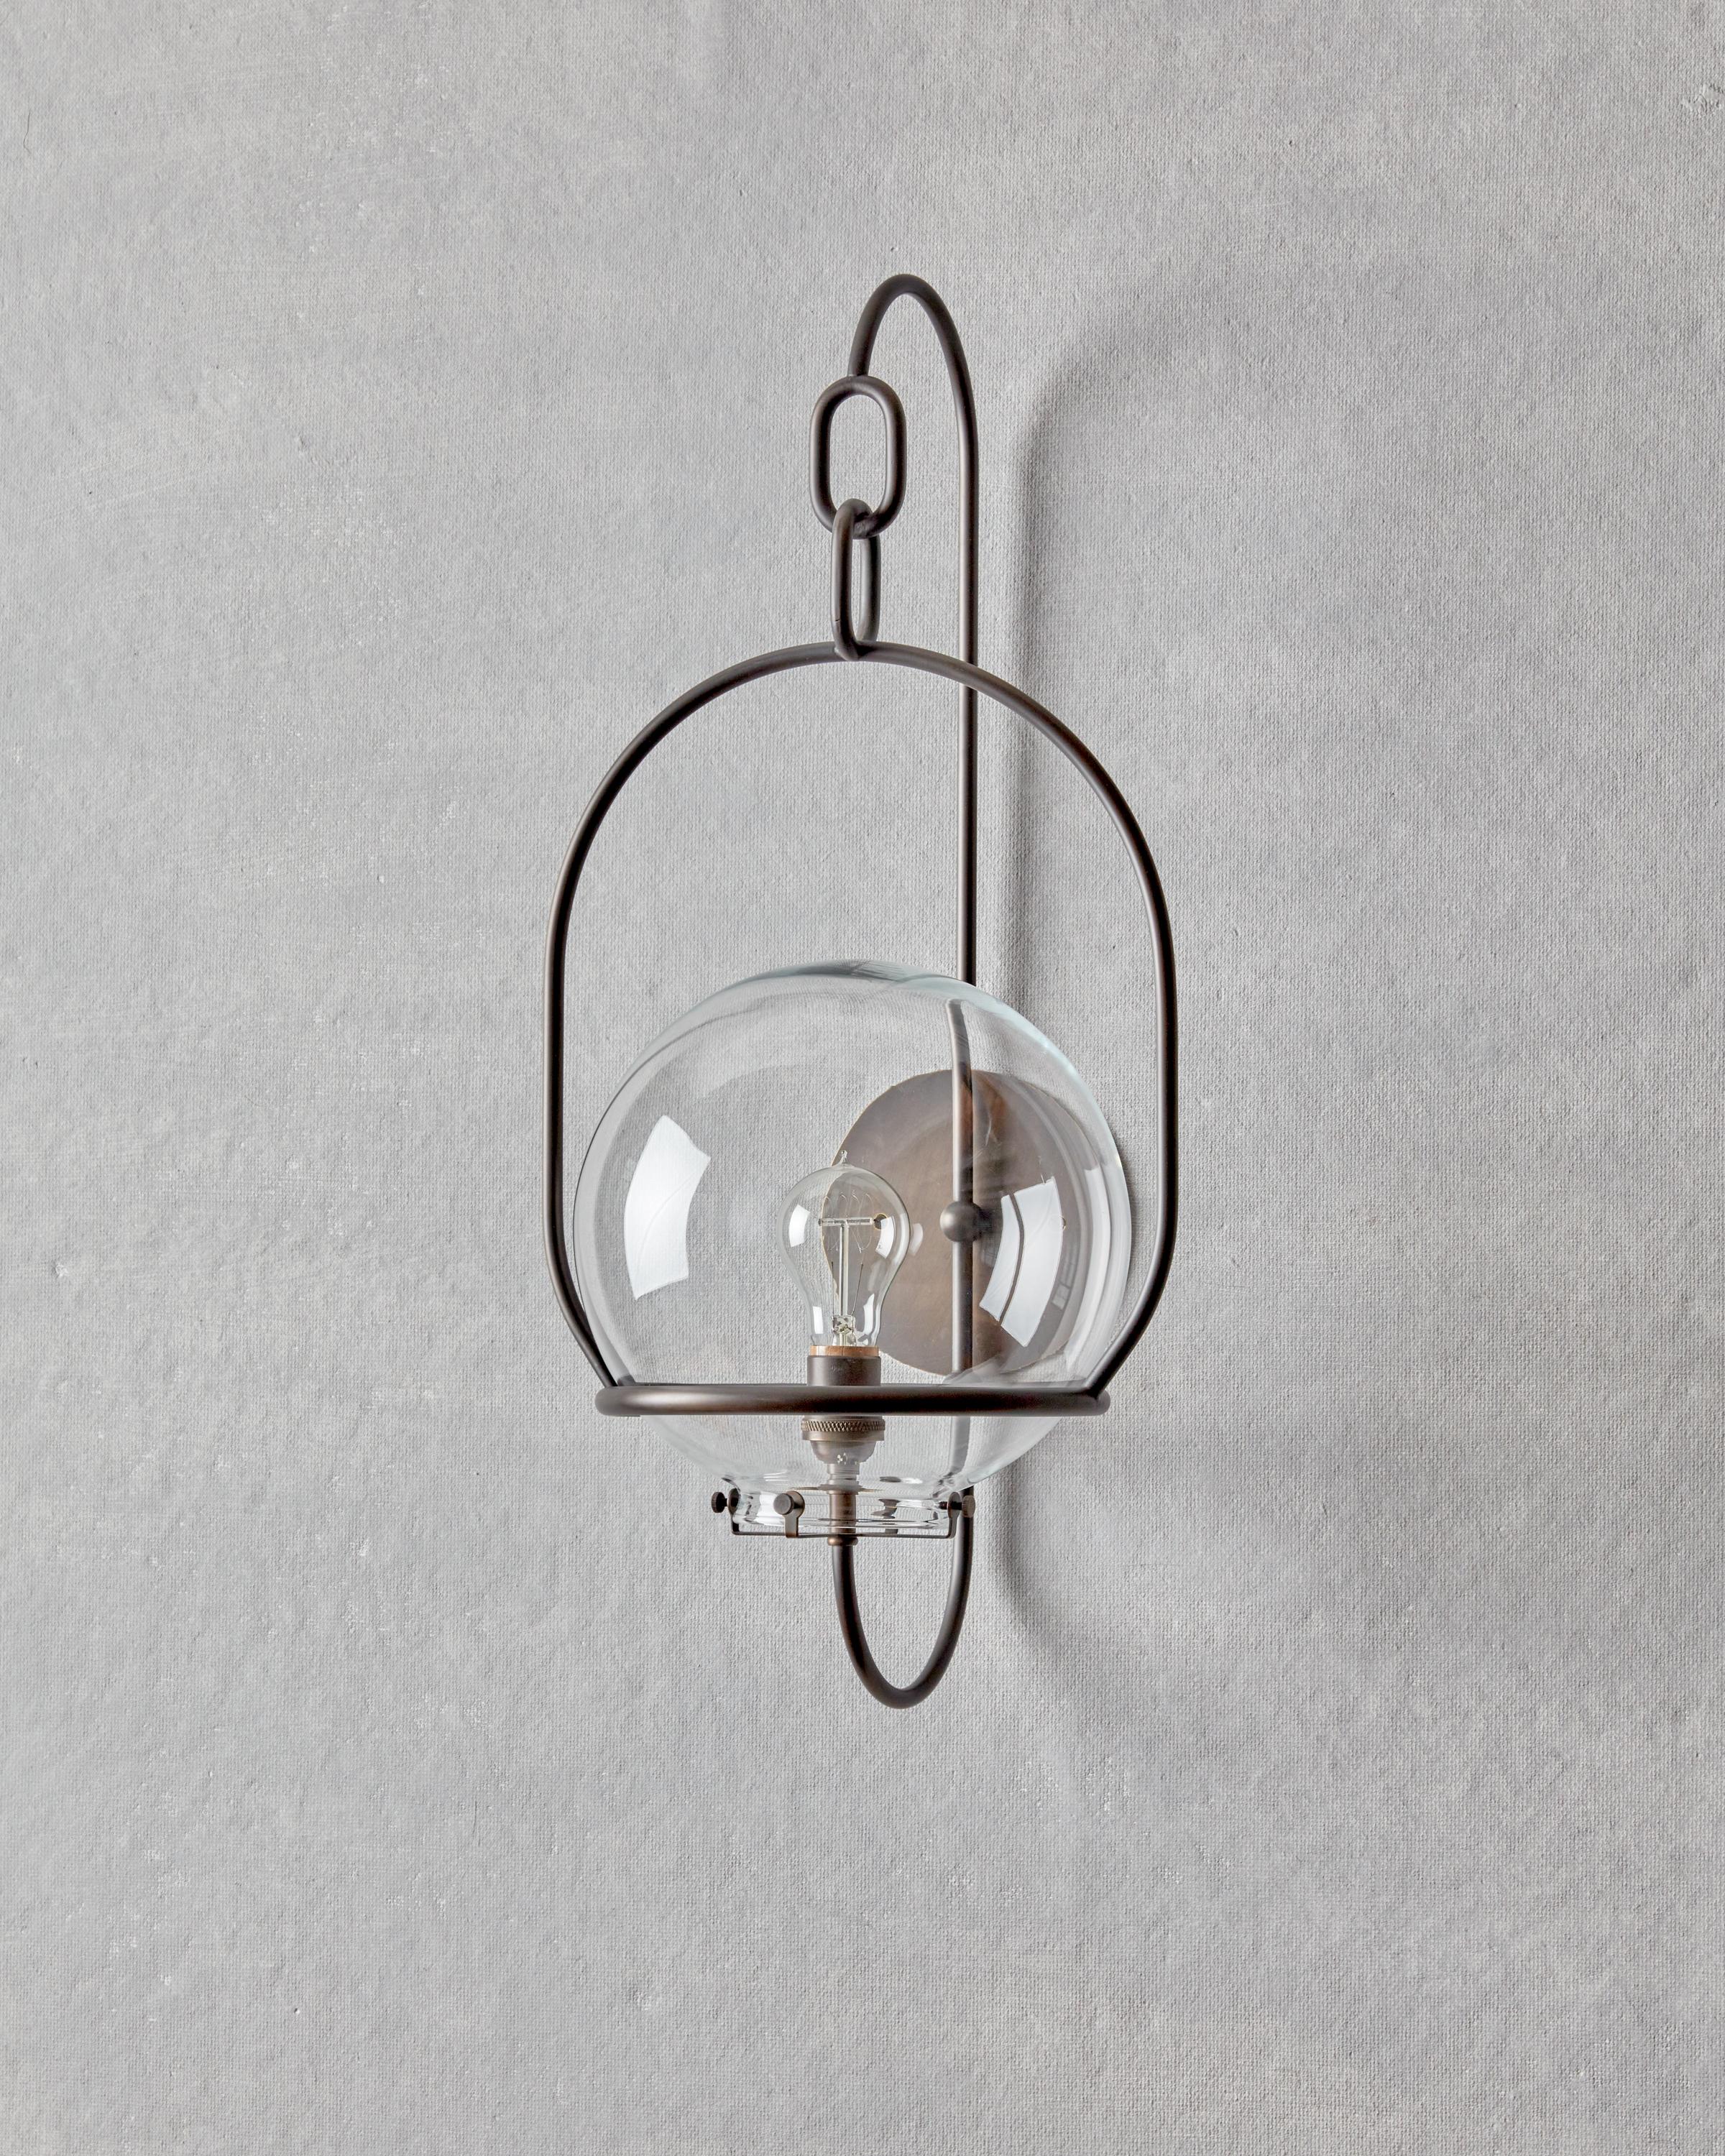 A timeless addition for an entryway rendered in bent brass, the Emil Wall Lantern is an updated classic with a nod to tradition. 

OVERALL DIMENSIONS
11